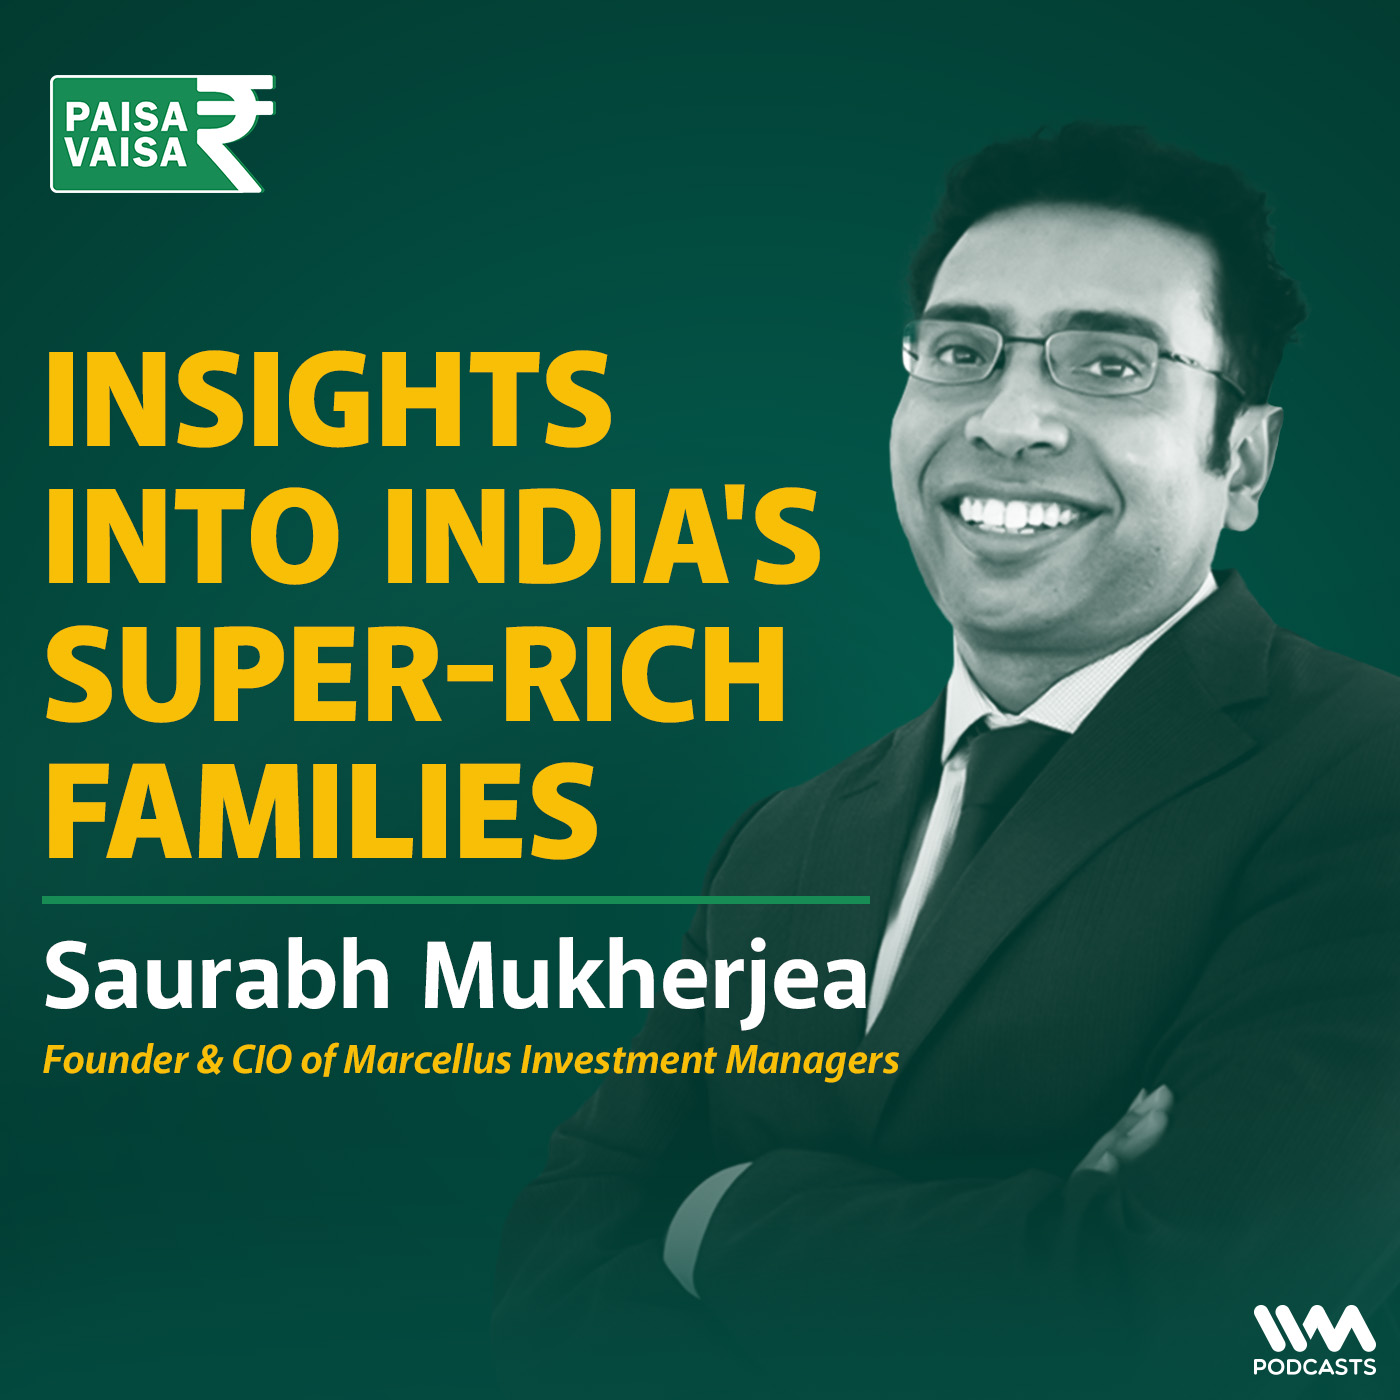 Insights into India's Super-Rich Families with Marcellus Investment Managers